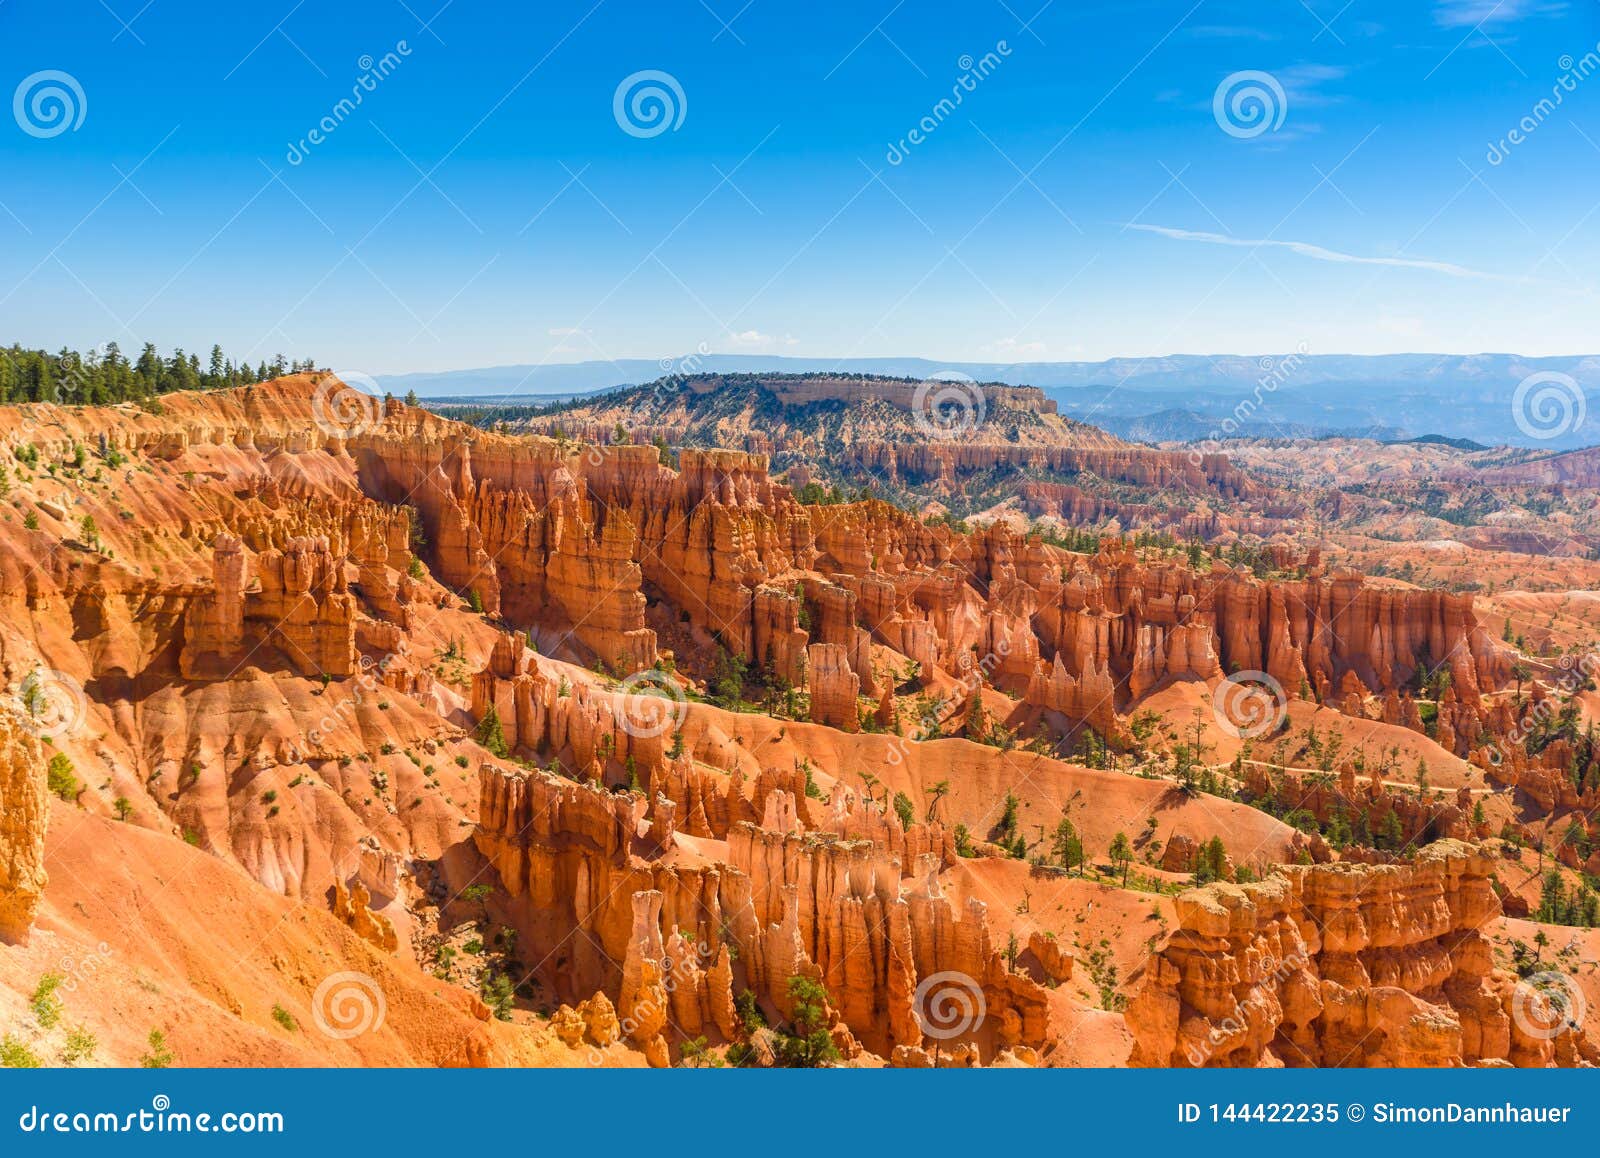 scenic view of beautiful red rock hoodoos and the amphitheater from sunset point, bryce canyon national park, utah, united states